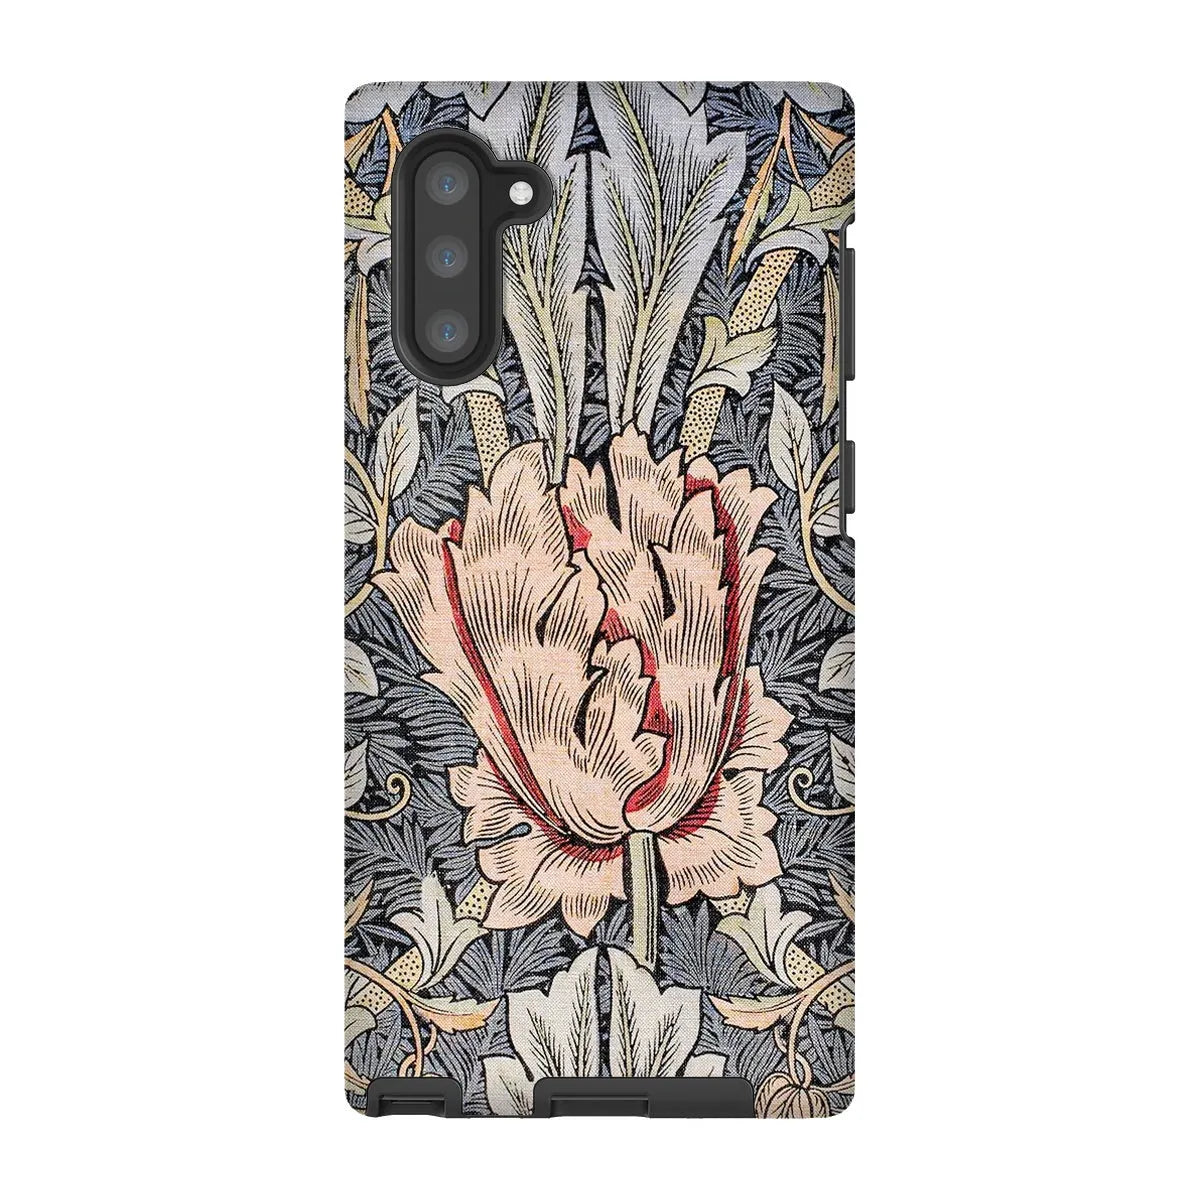 Honeysuckle Arts And Crafts Movement Phone Case - William Morris - Samsung Galaxy Note 10 / Matte - Mobile Phone Cases